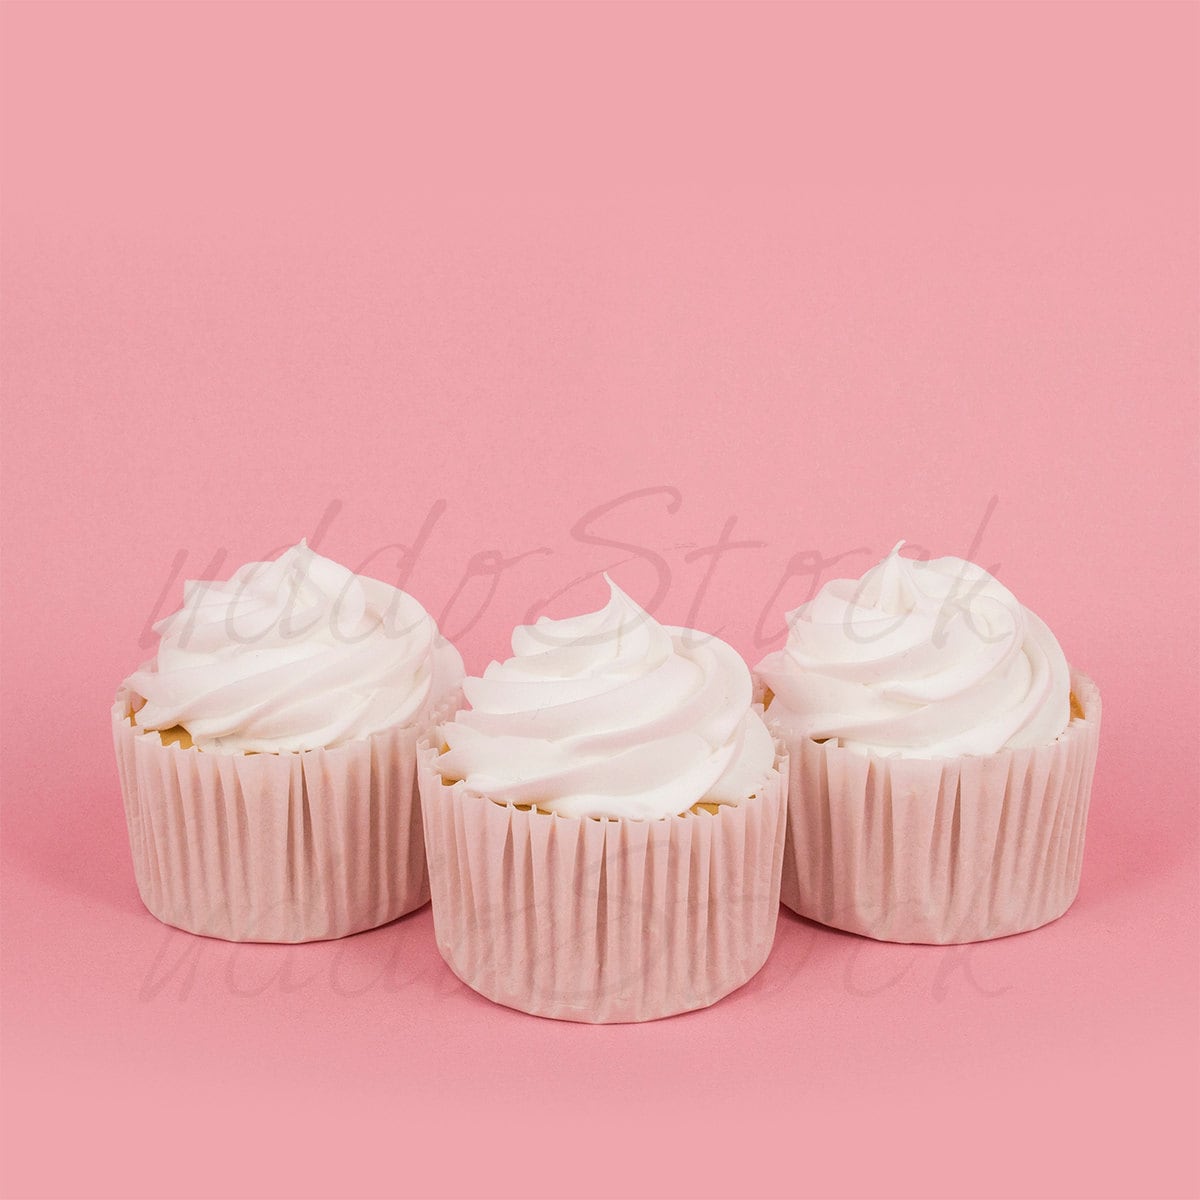 Download Yellowimages Mockups Cupcake Mockup Object Mockups - Free PSD Mockups Smart Object and Templates ...